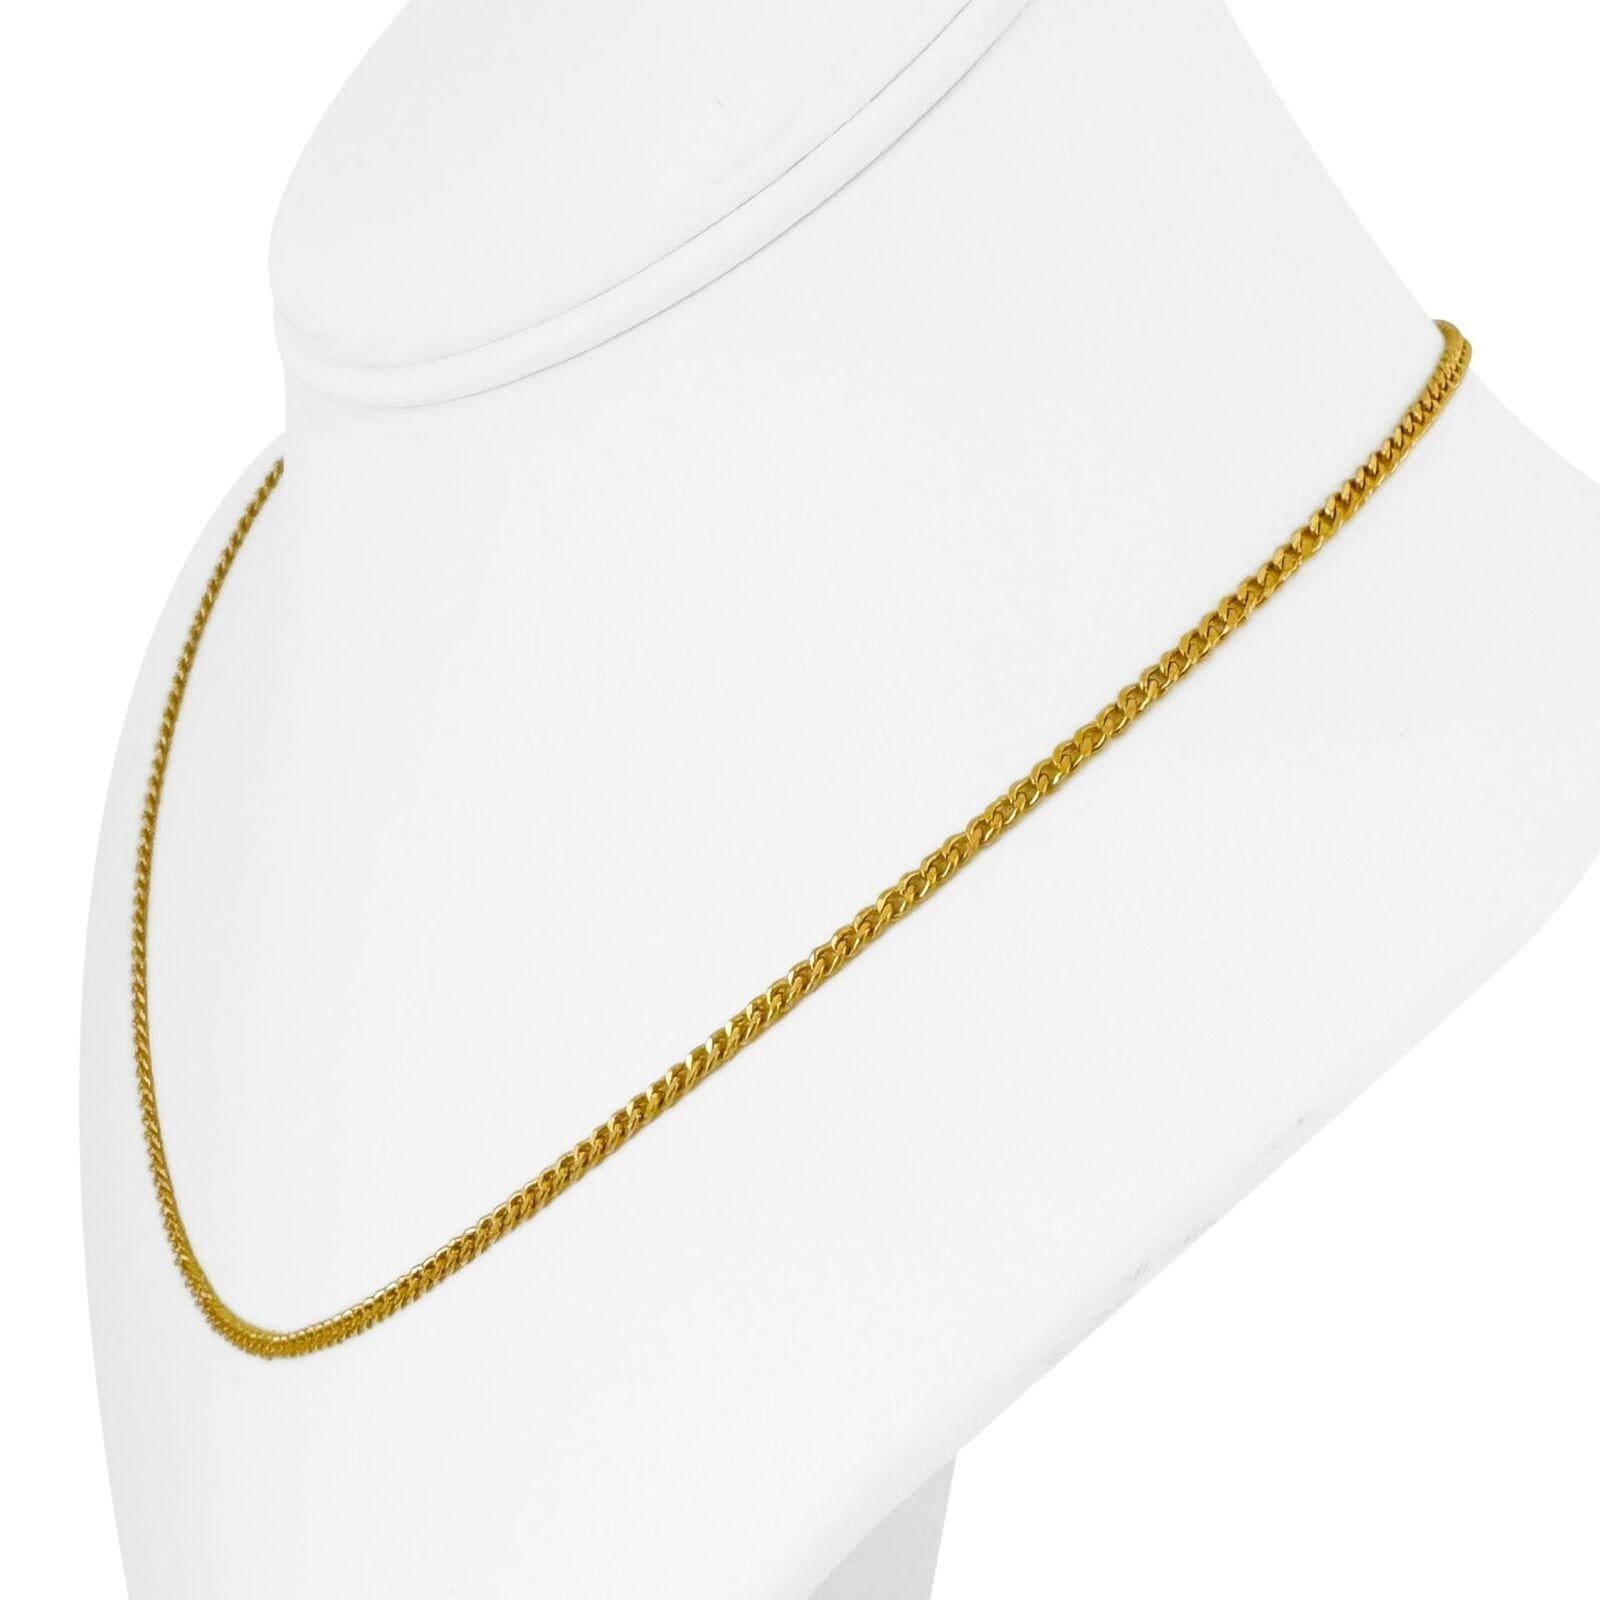 24k Pure Yellow Gold 11.1g Solid Thin 1.5mm Curb Link Chain Necklace 18